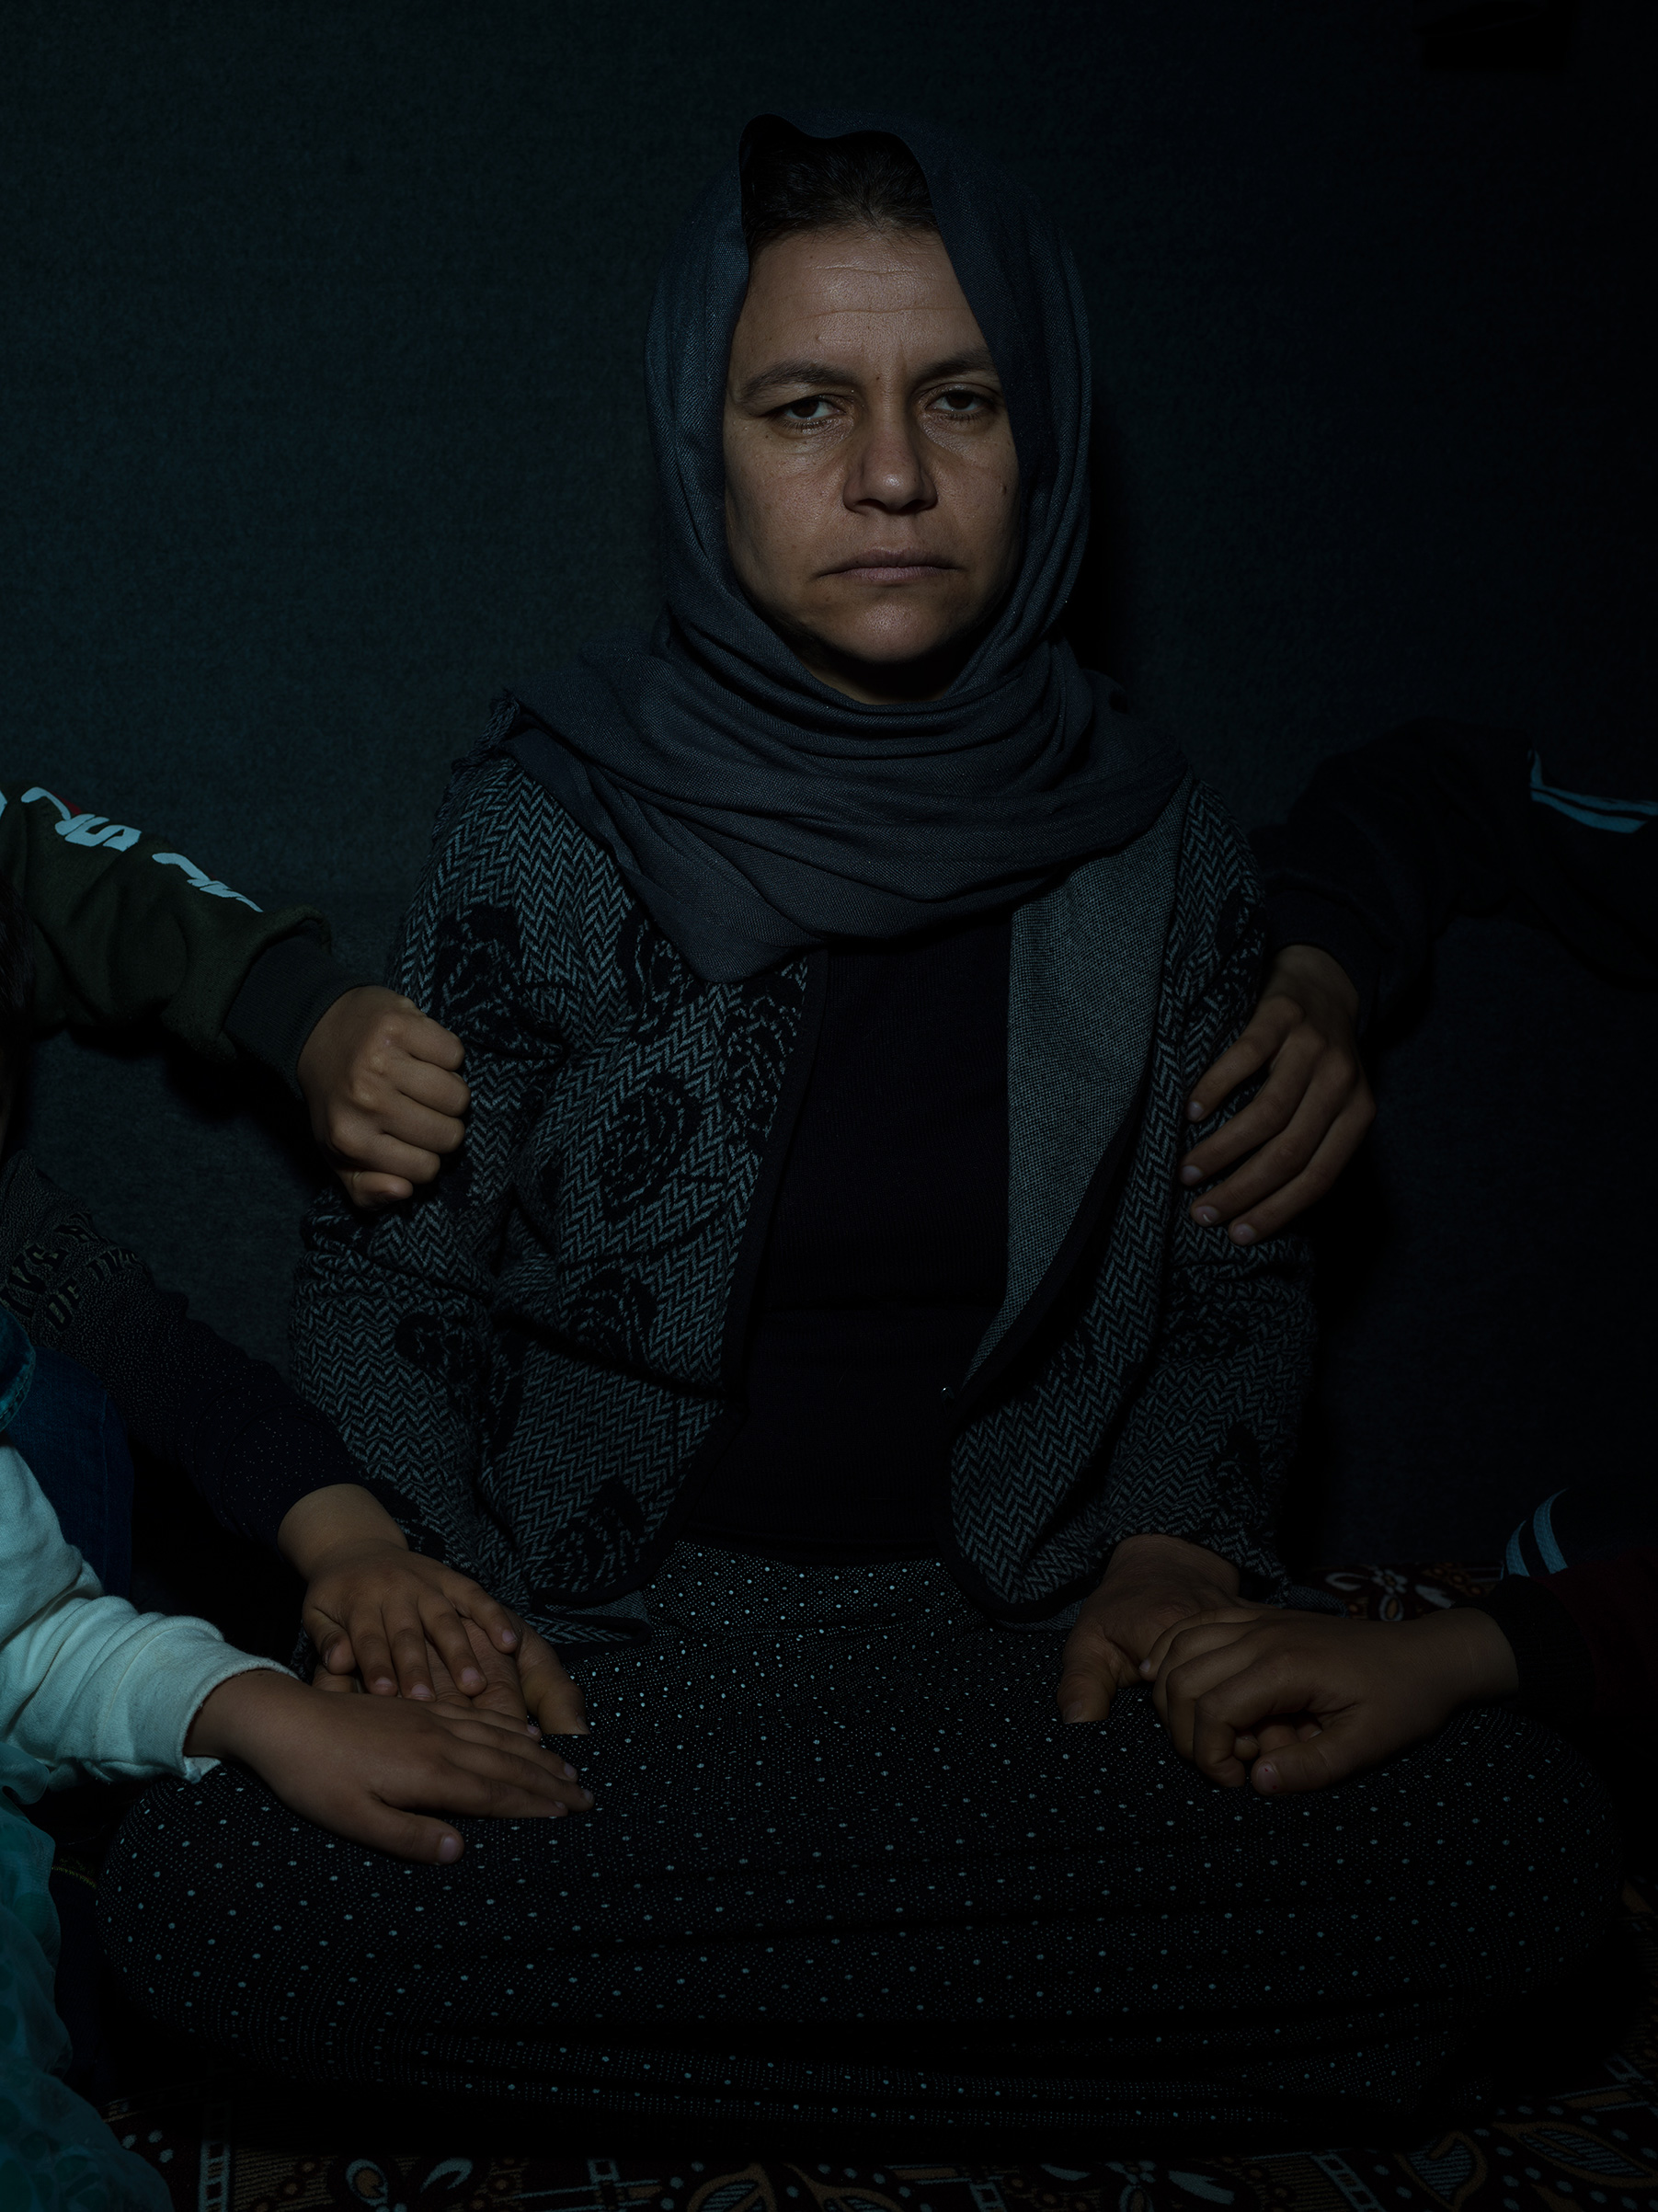 Subha, 35, and the hands of her children: Fahad, 15; Fahdi, 13; Linda, 10; Liza, 7; and Salam, 5. "What Remains of ISIS," June 3 issue. (Newsha Tavakolian—Magnum Photos for TIME)